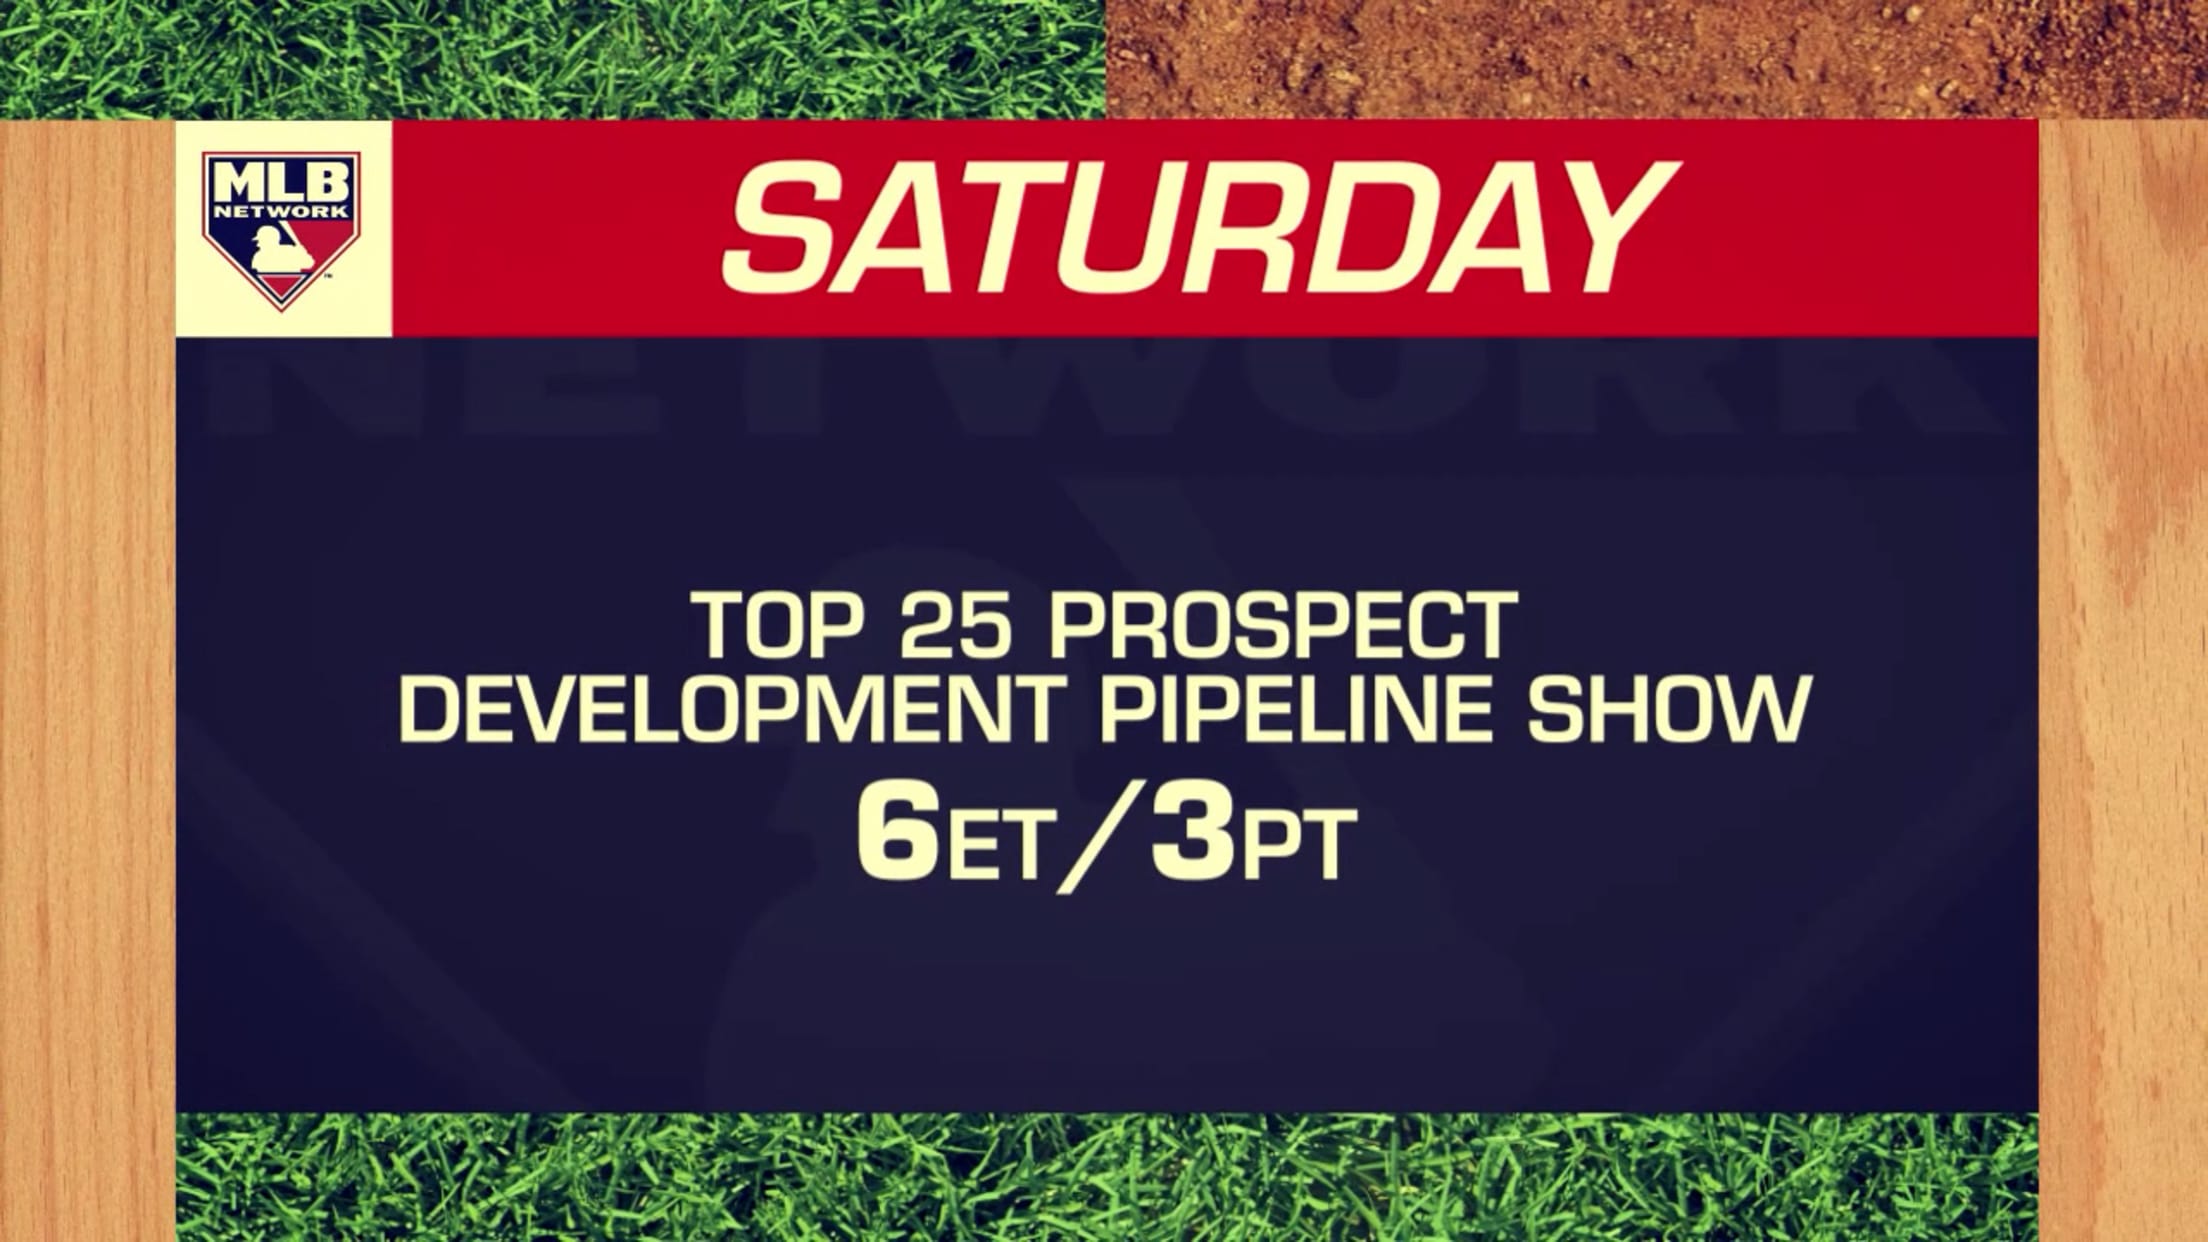 Top 25 PDP Show this Saturday